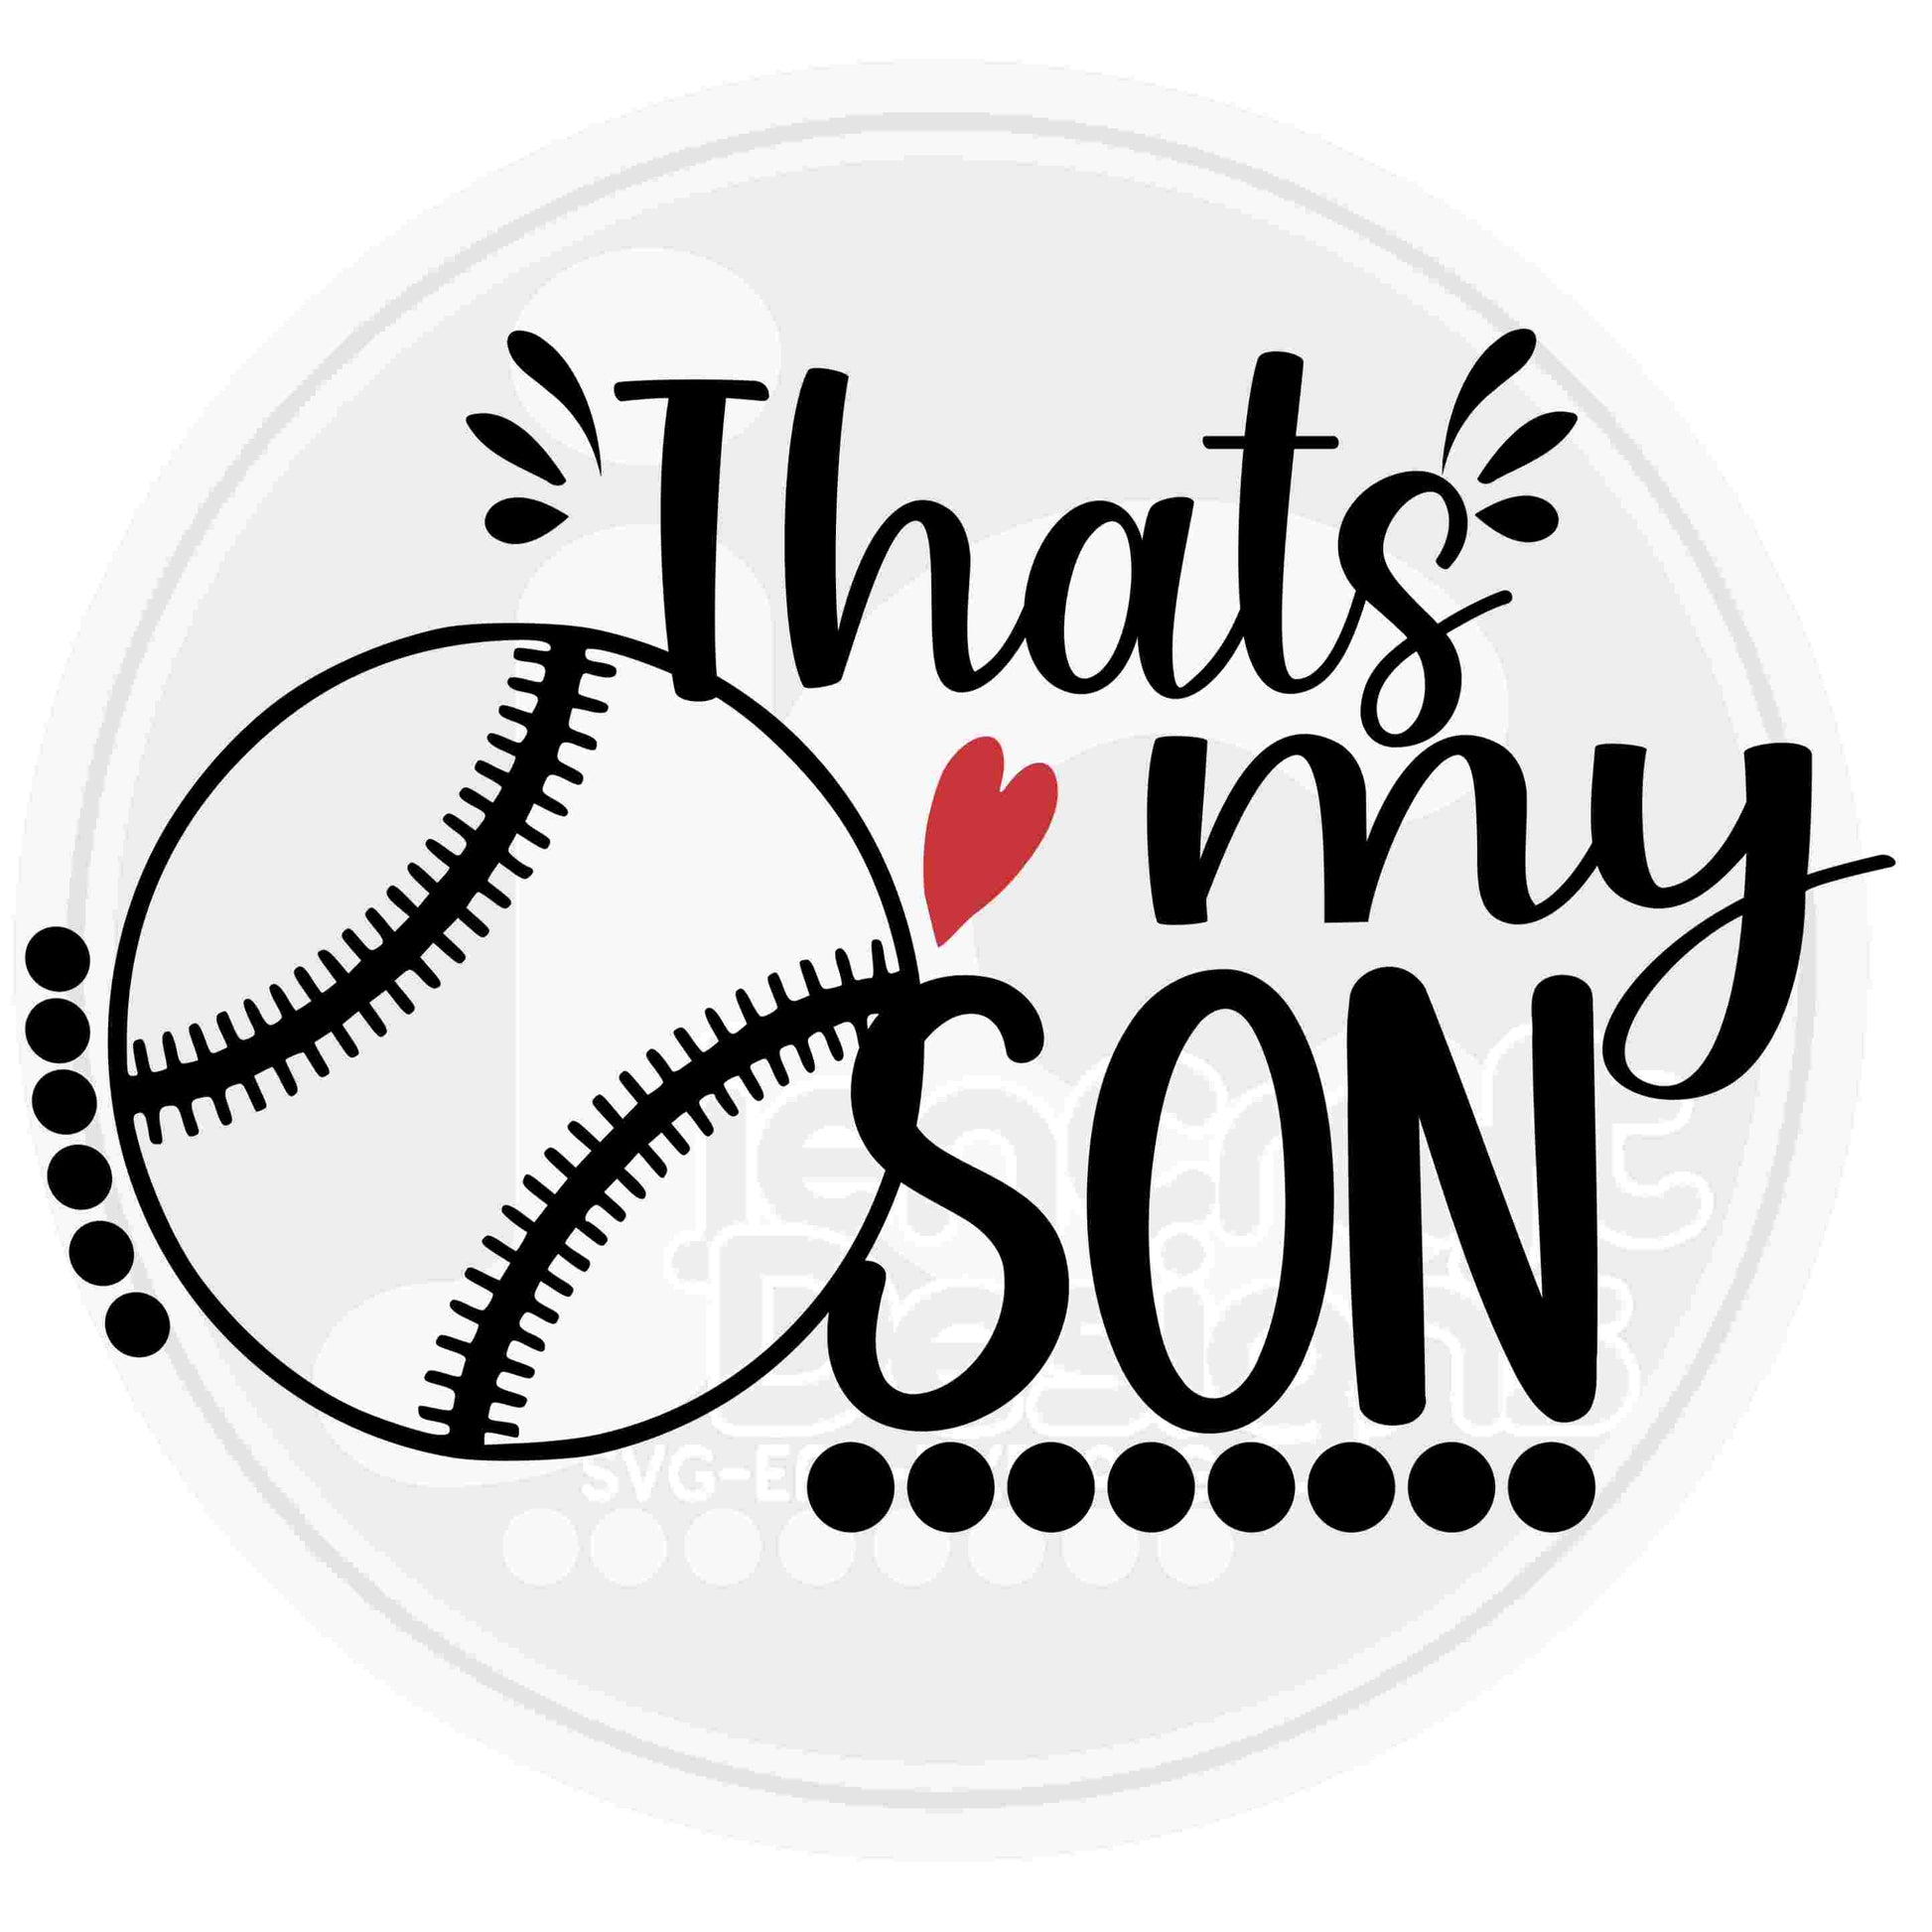 That's my Son Baseball Biggest Fan Svg Eps Dxf Png Cut File - JenCraft Designs